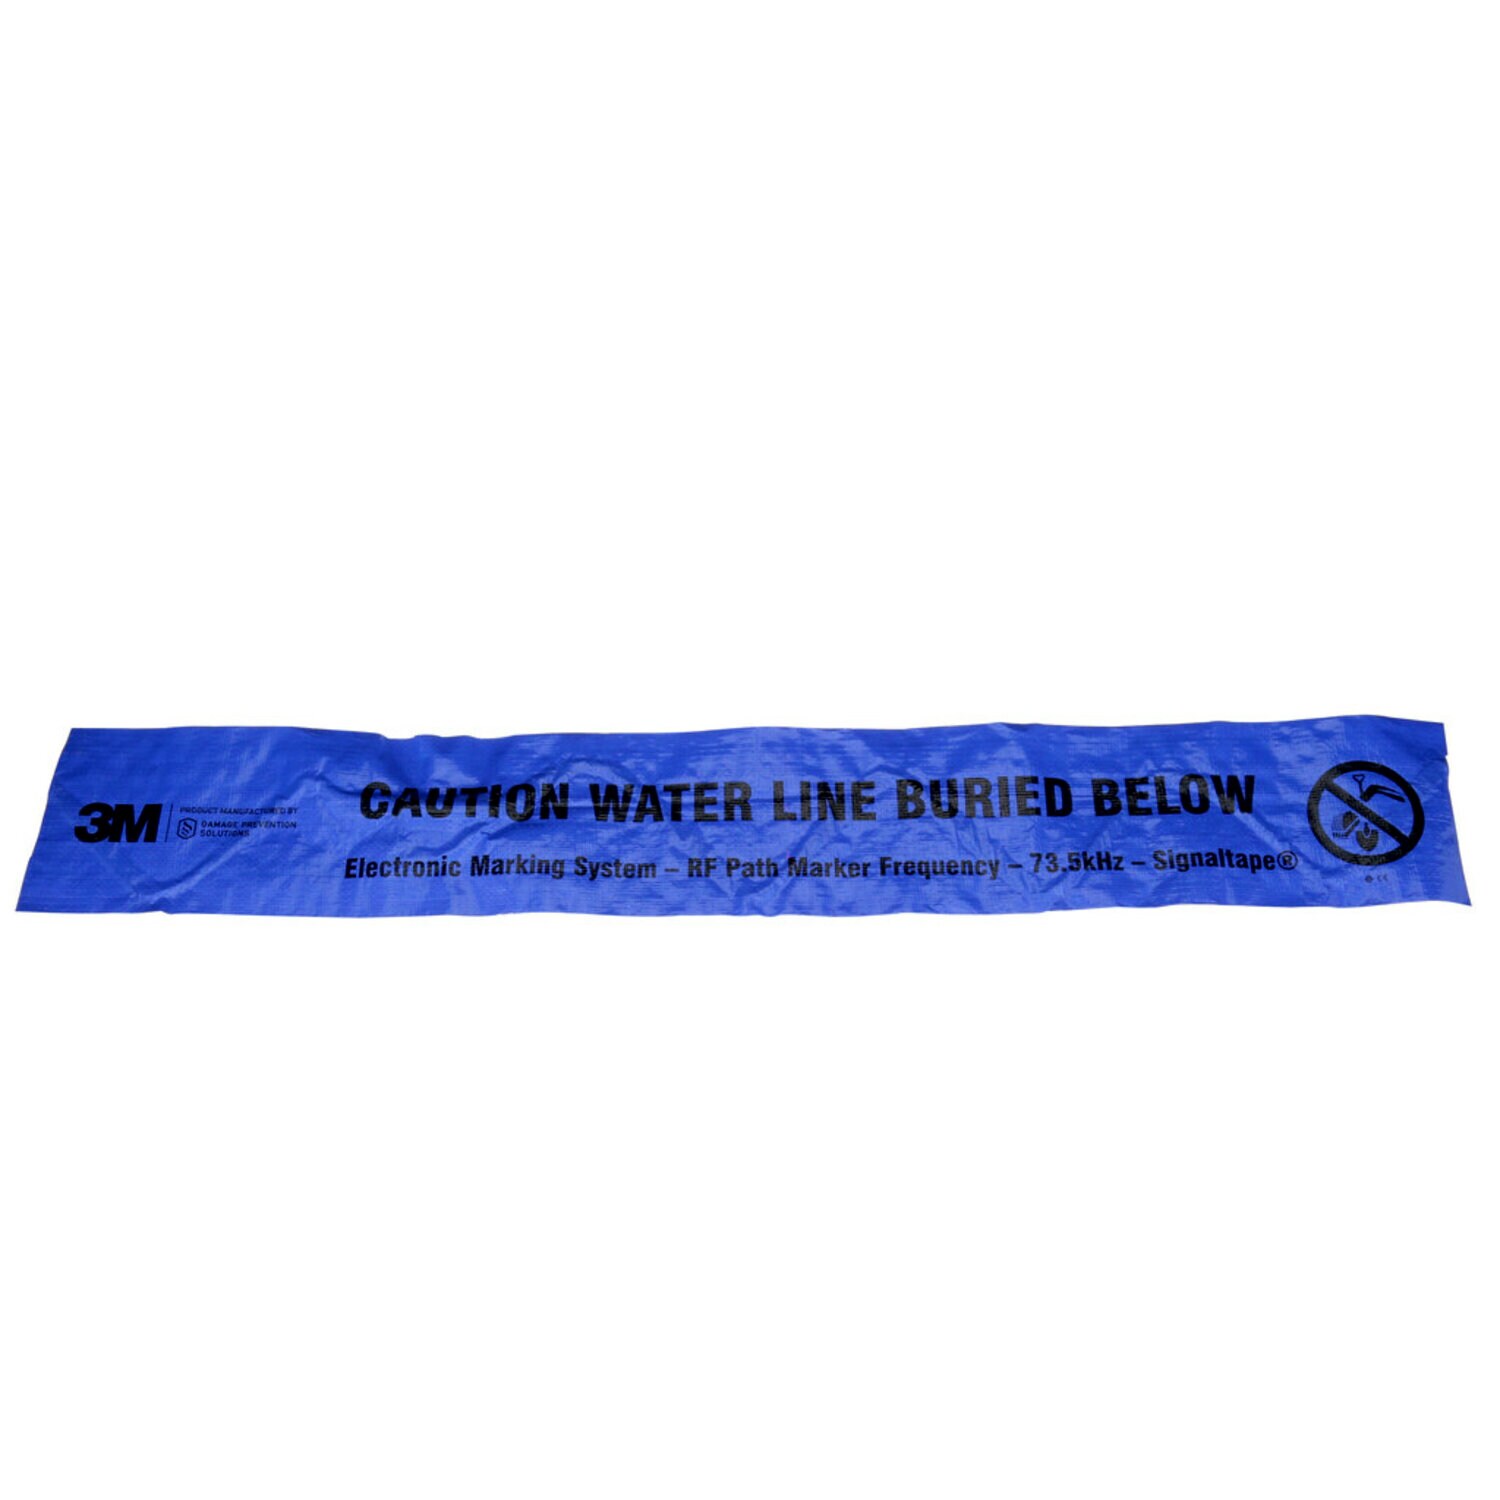 7100254480 - 3M Electronic Marking System (EMS) Warning Tape 7903-XT, Blue, 6 in, Water, 500ft, 1 Box/Case